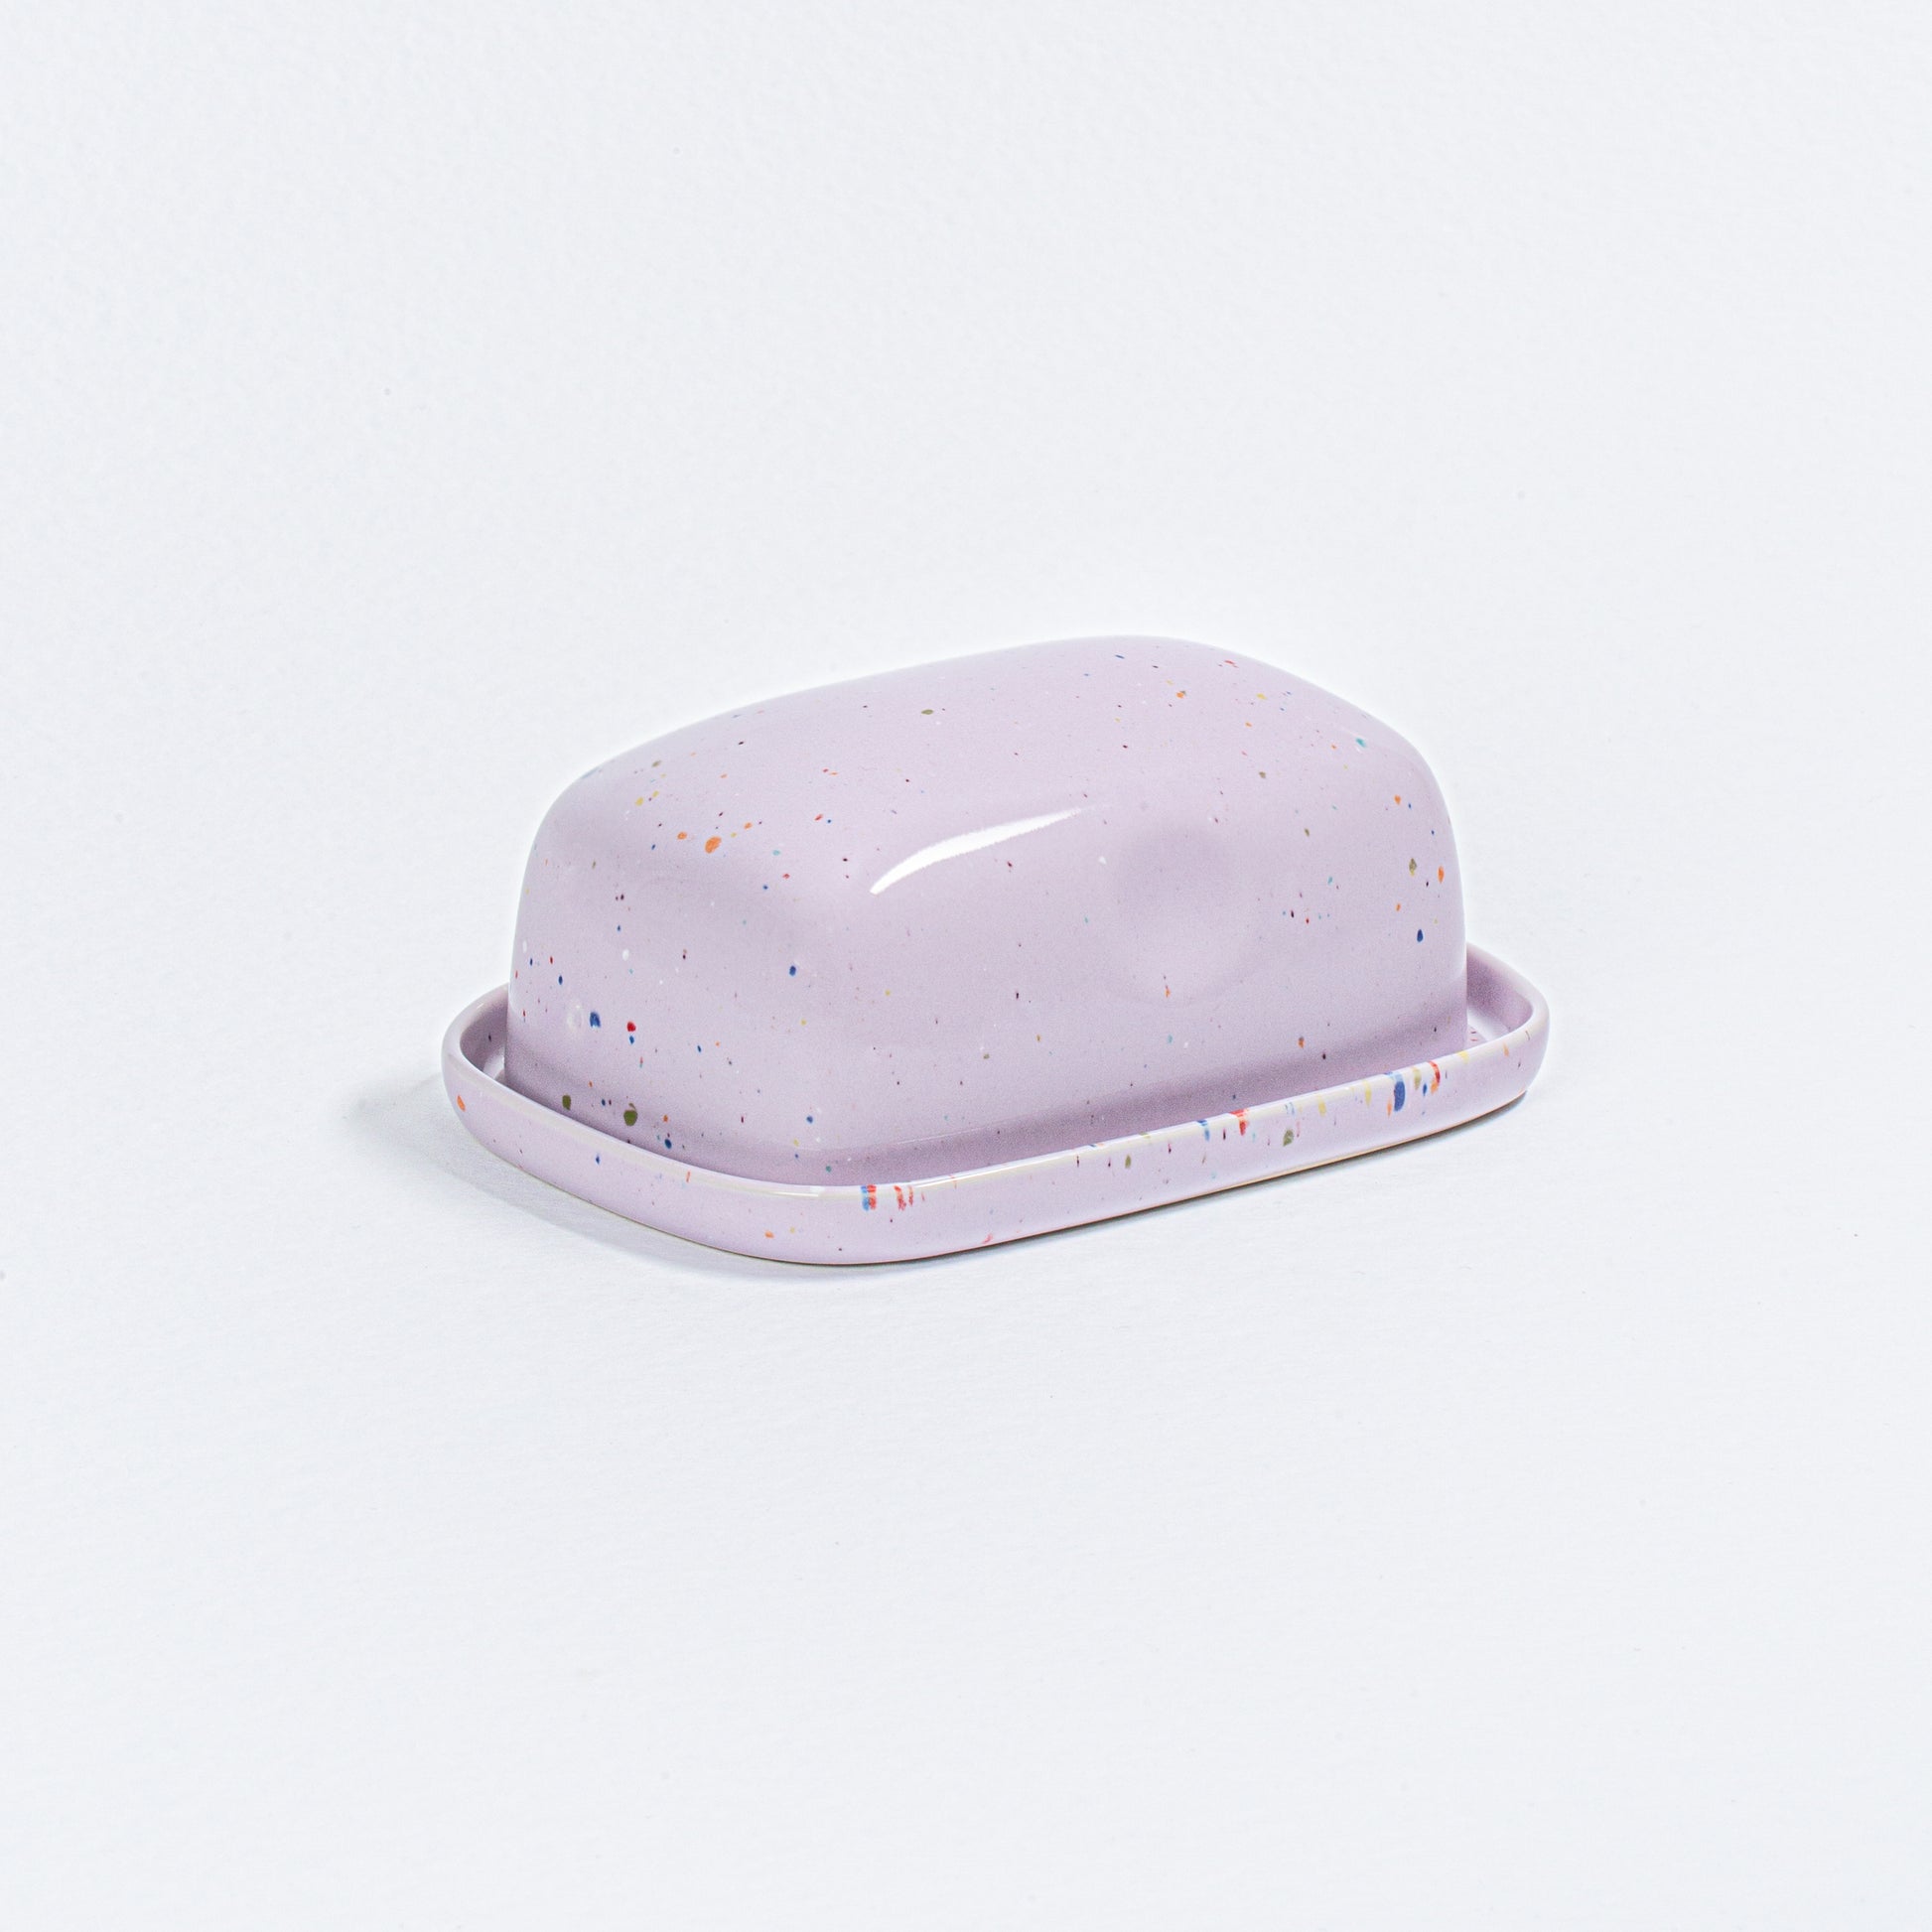 Butter Lilac Dish | Green Butter Dish | Egg Back Home